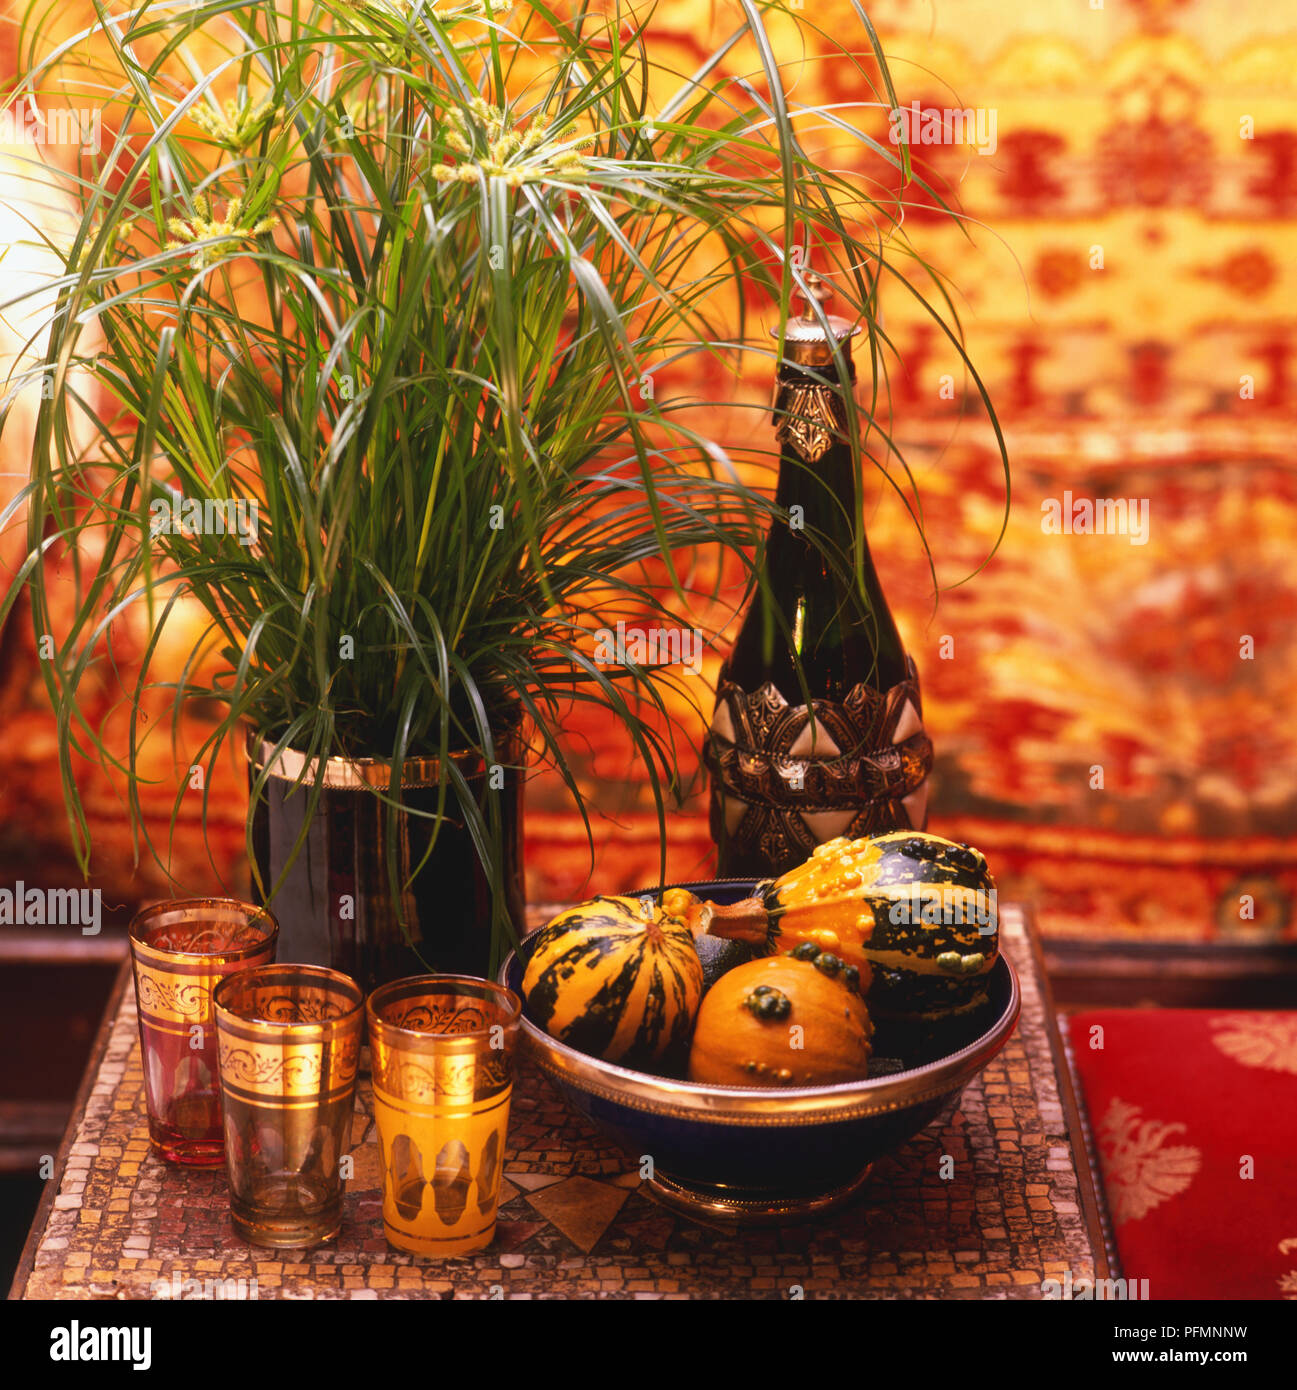 The arching umbrella effect of this Cyperus involucratus, Umbrella grass, with its long grassy leaves, provide an exotic touch to the surrounding bowl of pumpkins or squash, colourfully decorated bottle of wine and gilt-decorated drinking glasses. Stock Photo